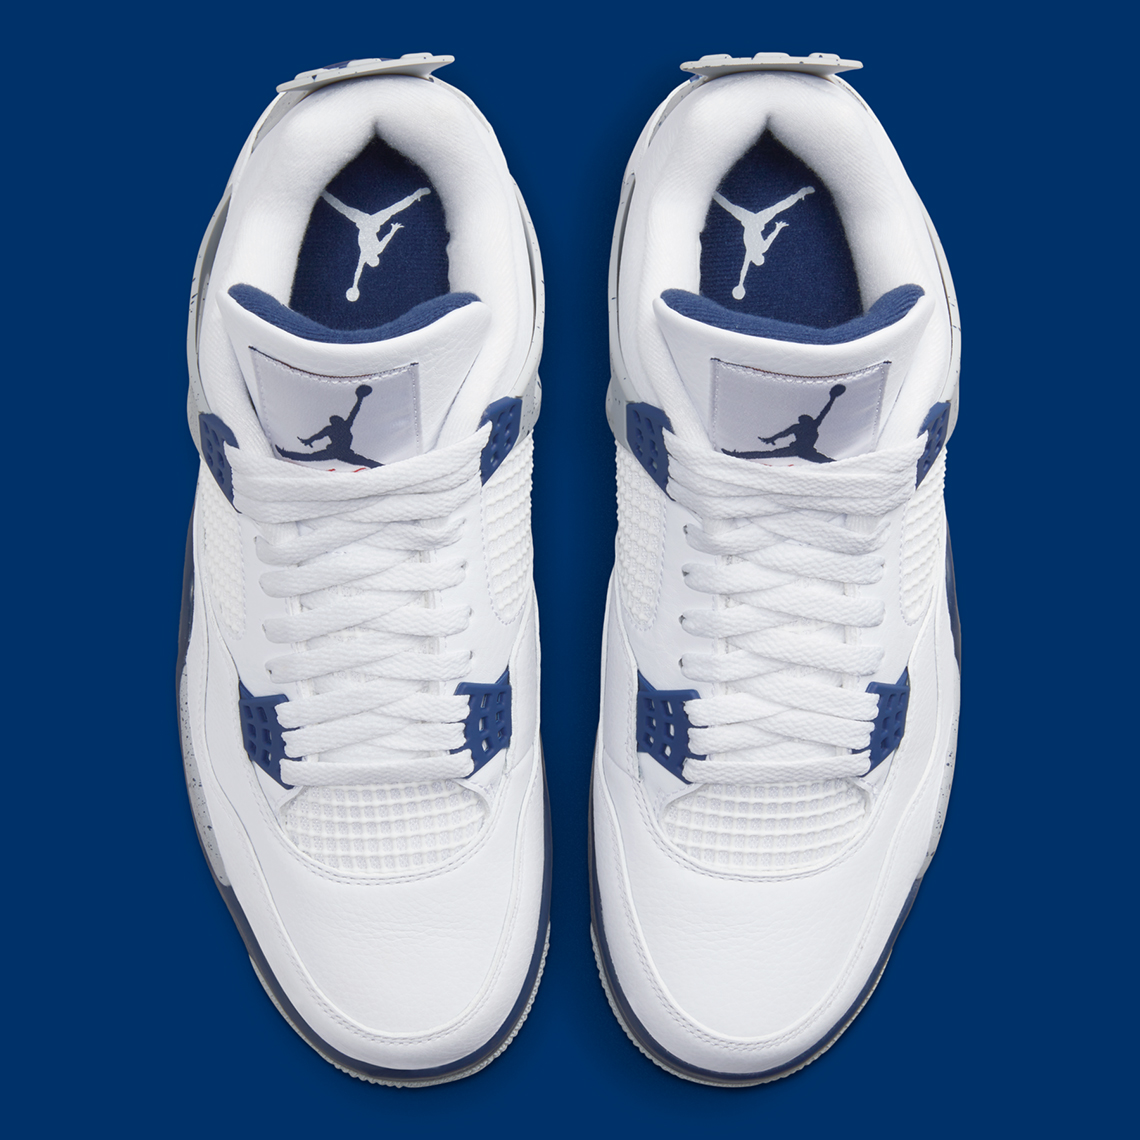 Air Jordan 4 White Navy Dh6927 140 Official Images 4